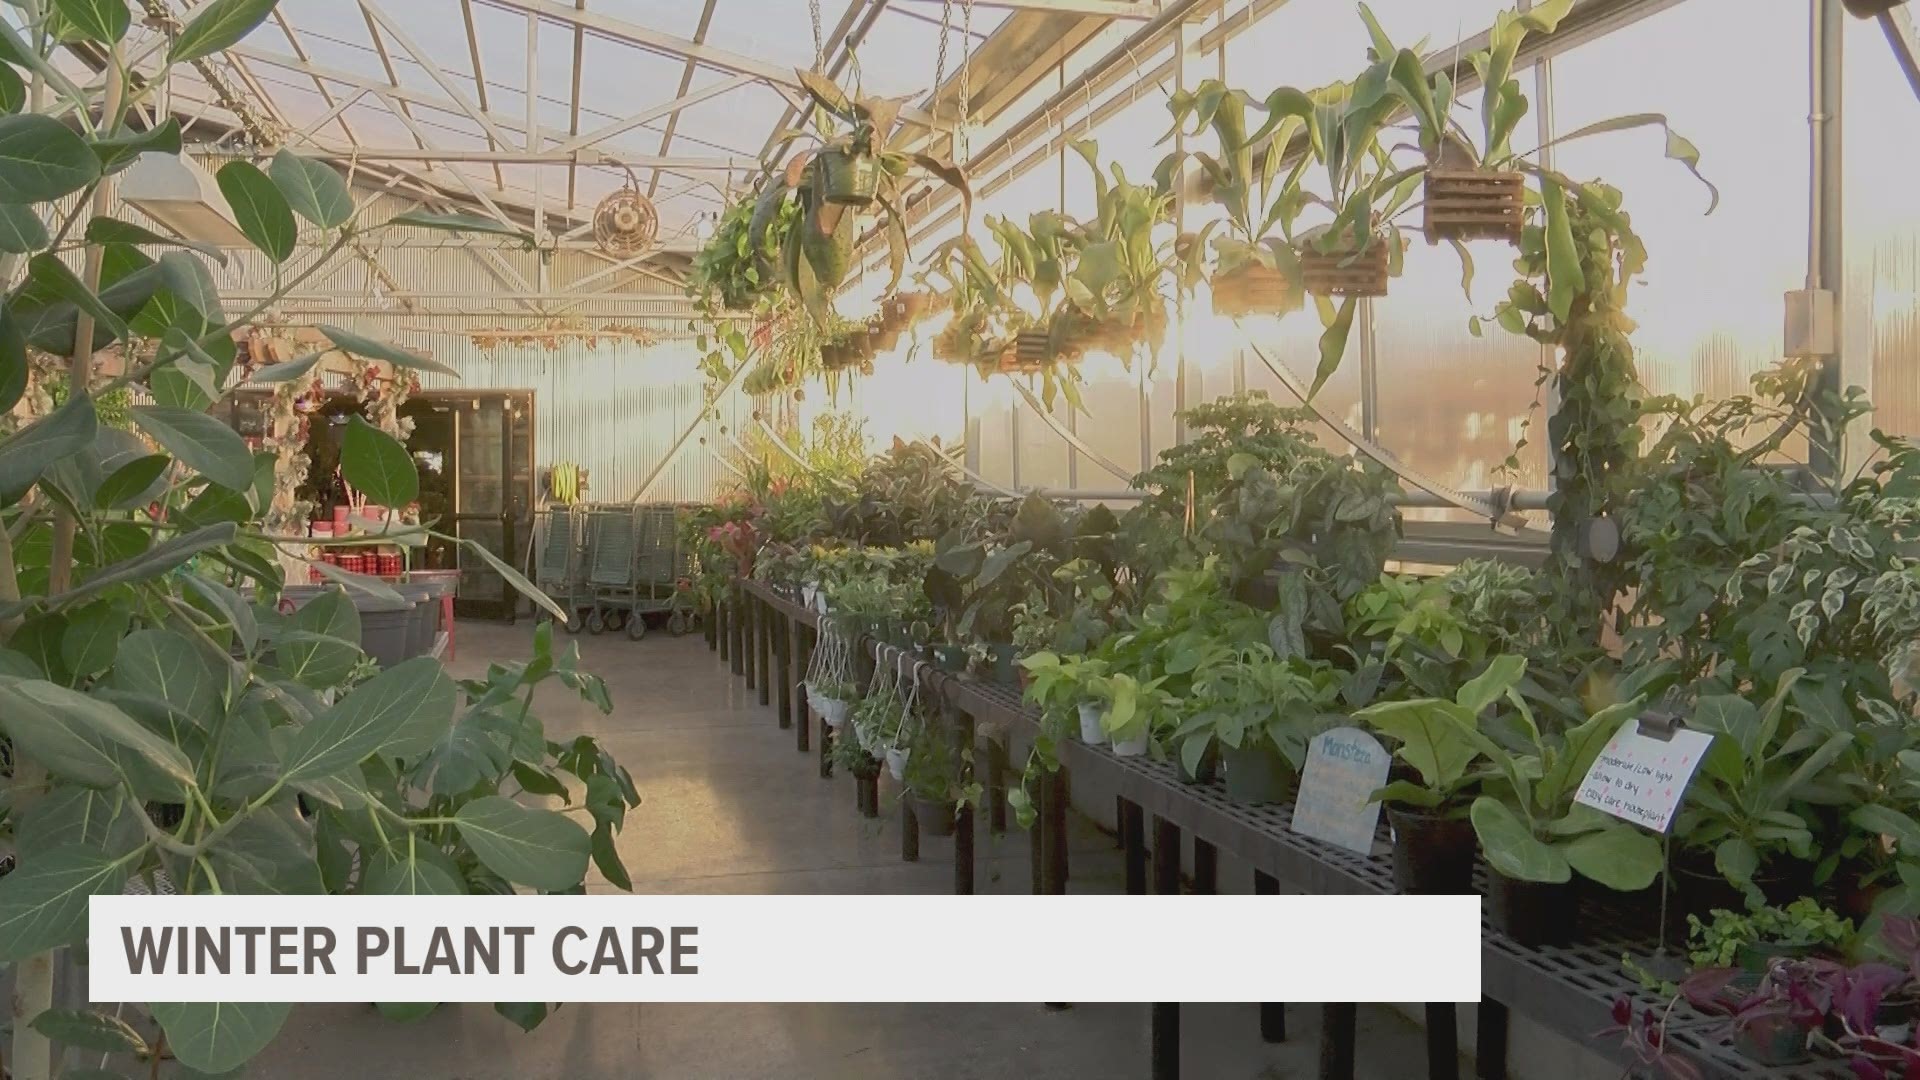 In a pandemic that's left so many businesses hurting, Ted Lare's Garden Center in Cumming has managed to bring their successes upward.